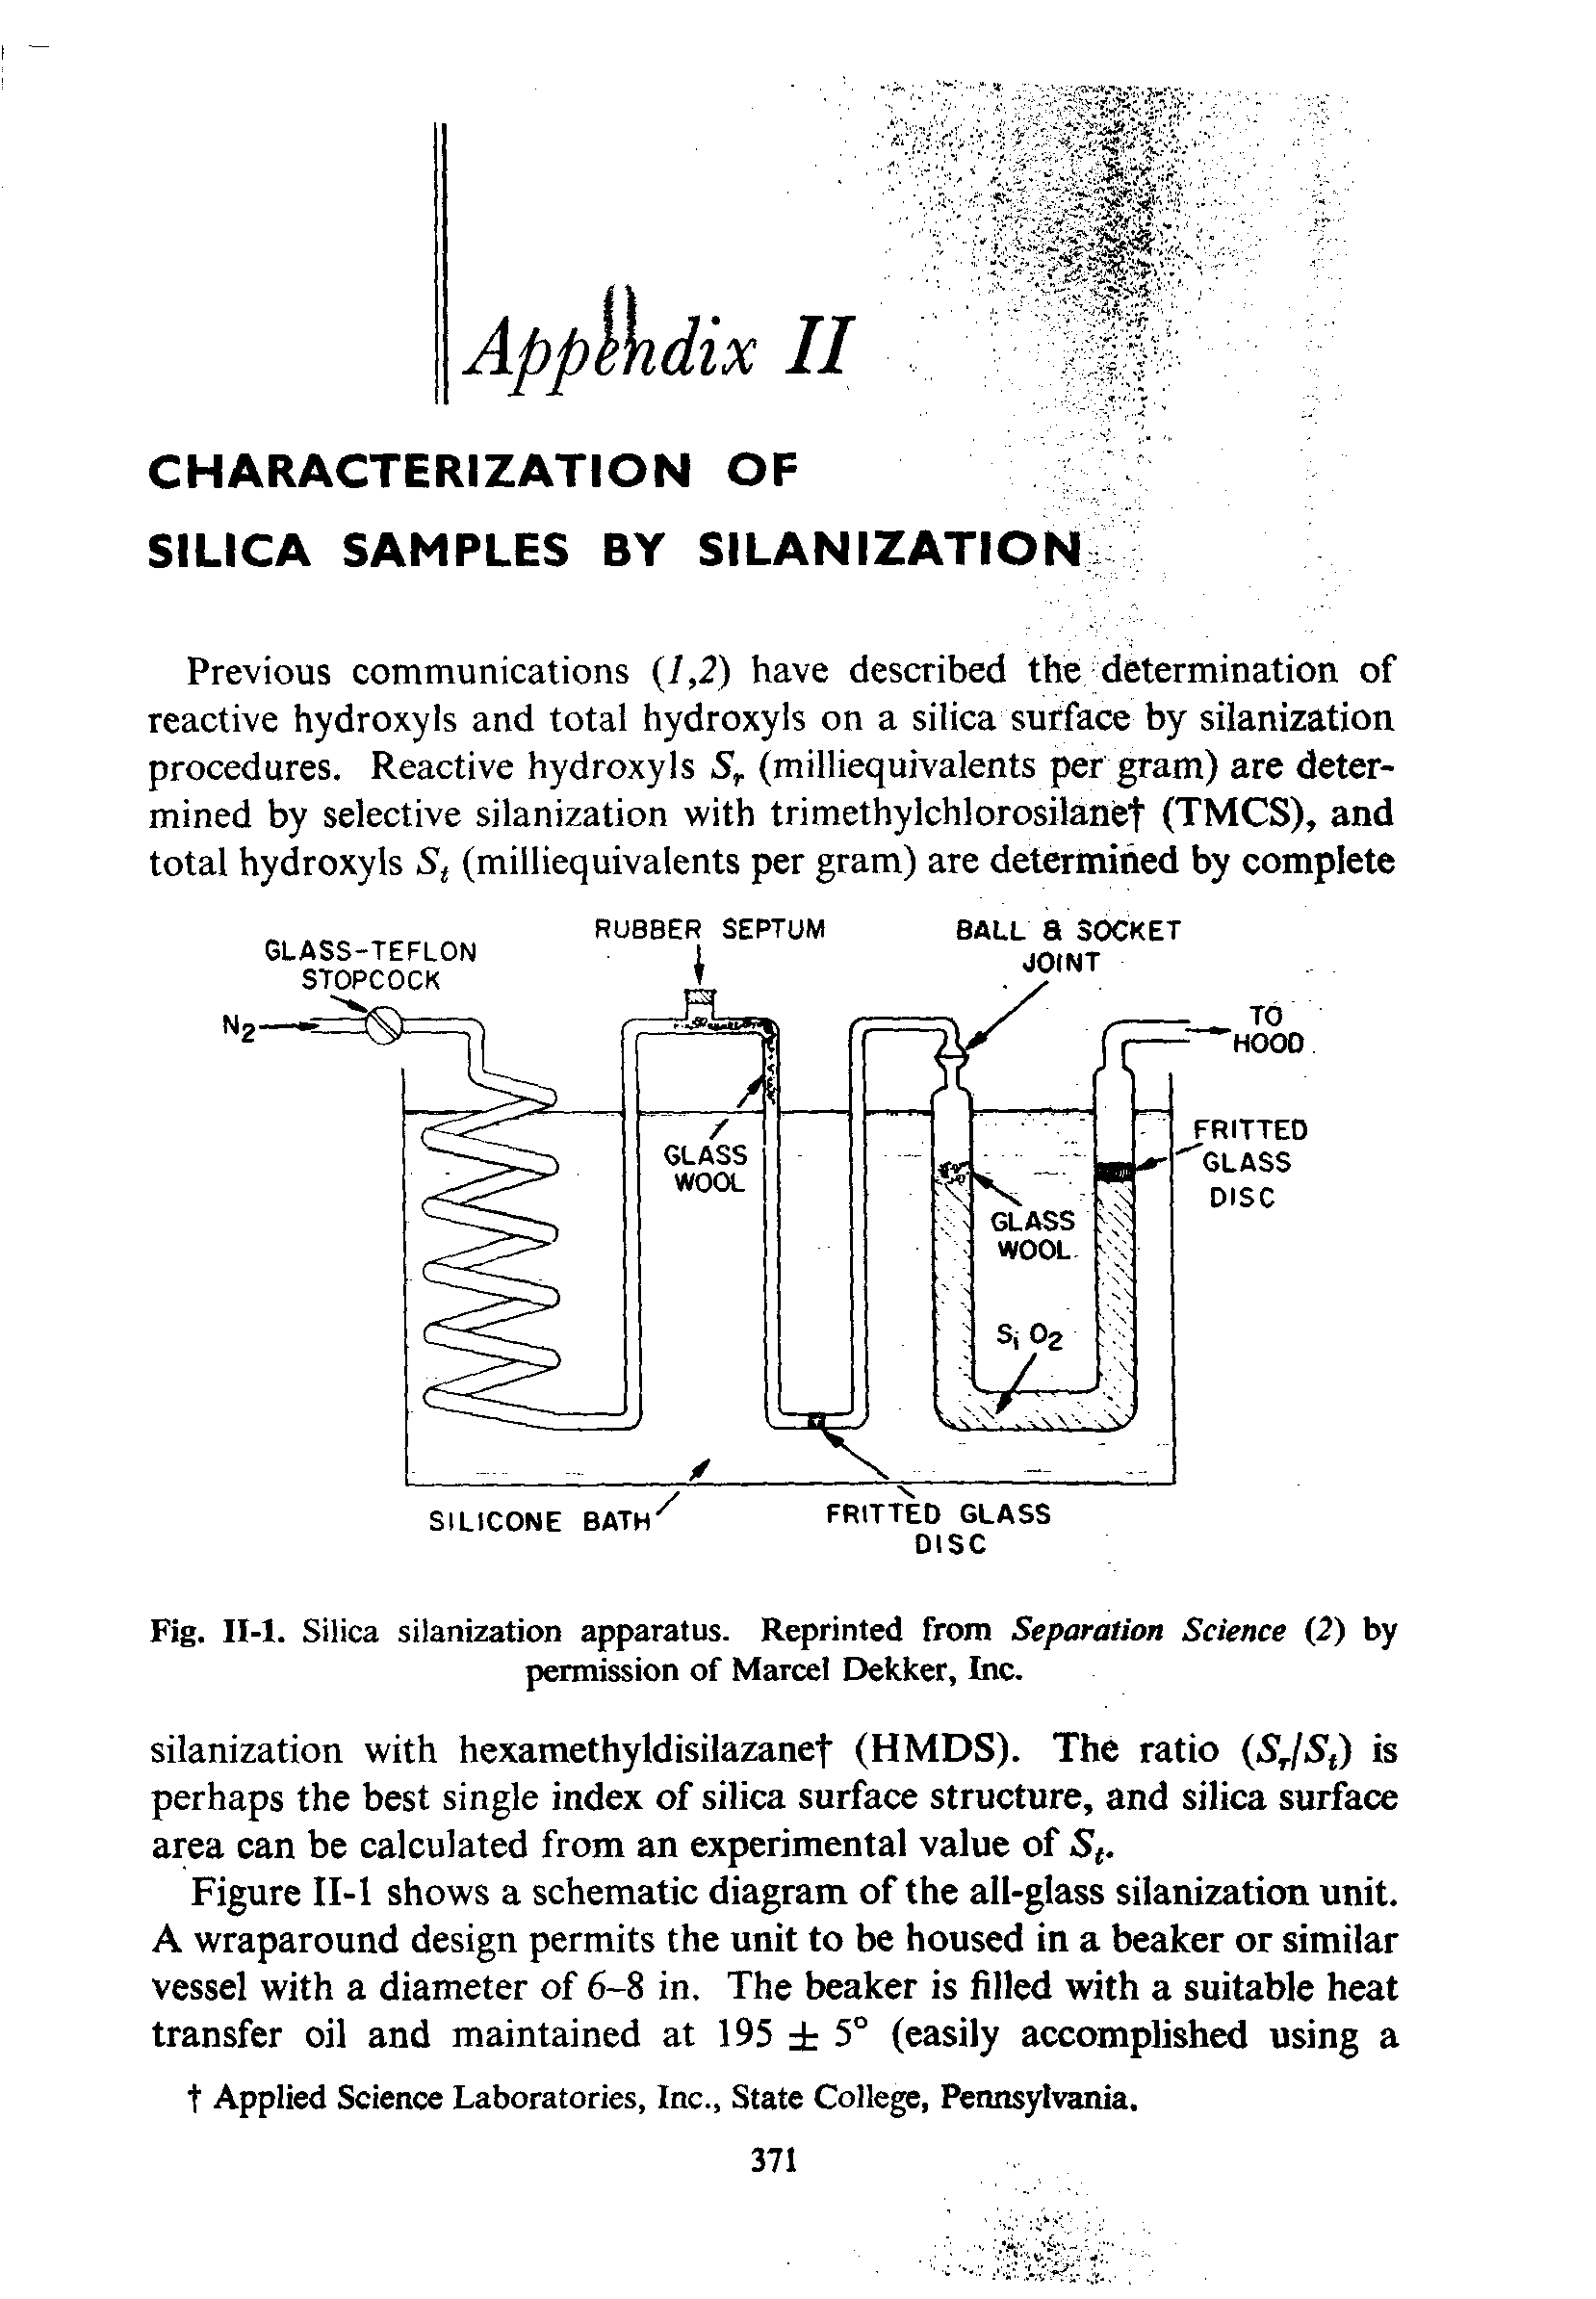 Figure II-l shows a schematic diagram of the all-glass silanization unit. A wraparound design permits the unit to be housed in a beaker or similar vessel with a diameter of 6-8 in. The beaker is filled with a suitable heat transfer oil and maintained at 195 5° (easily accomplished using a...